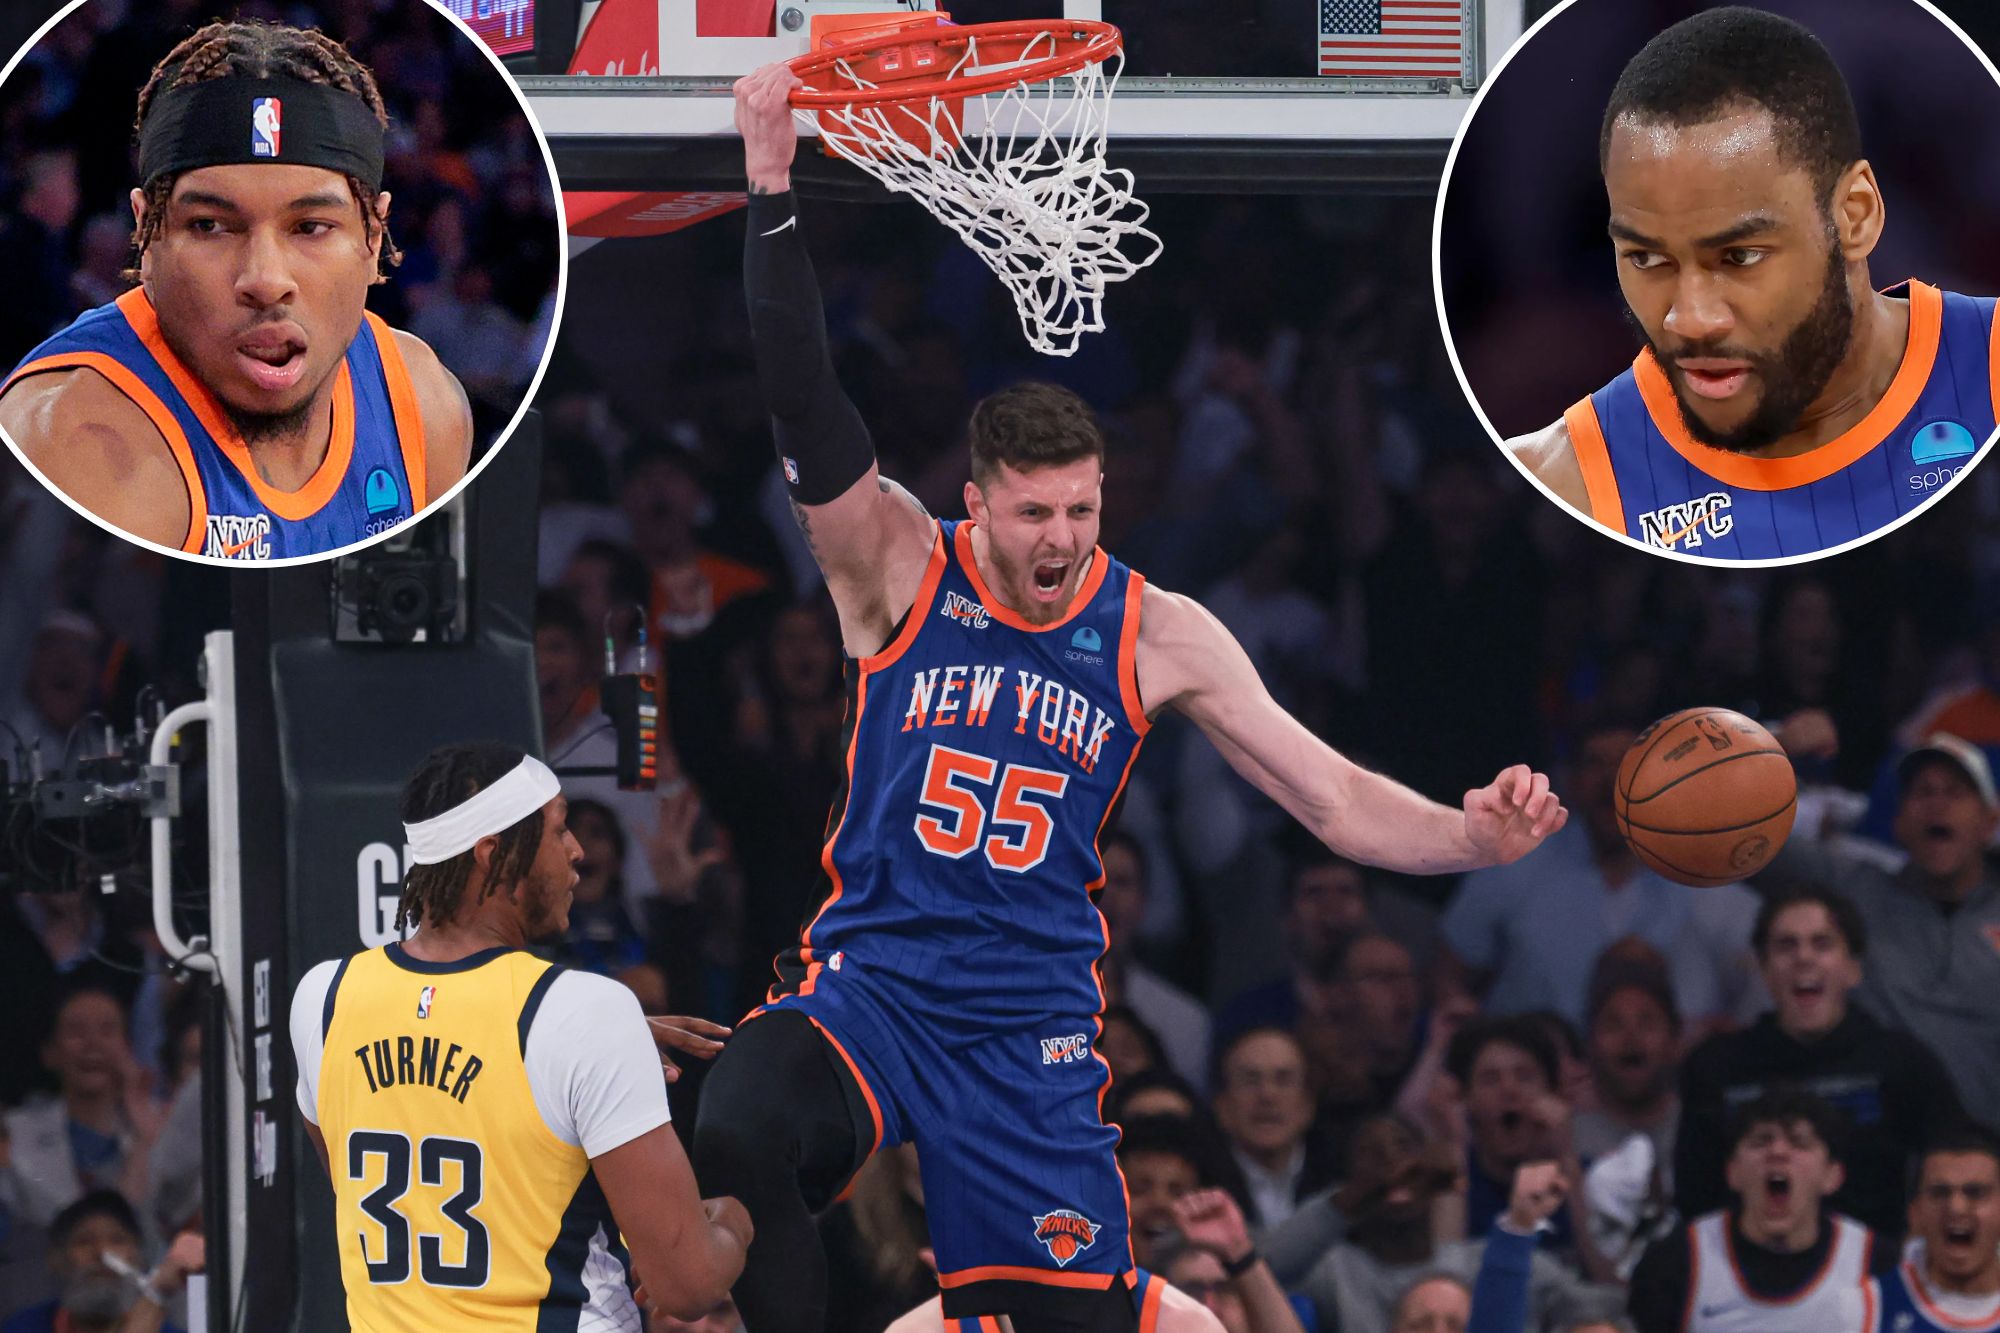 How the Knicks' supporting cast fueled a thrilling, series-tilting win